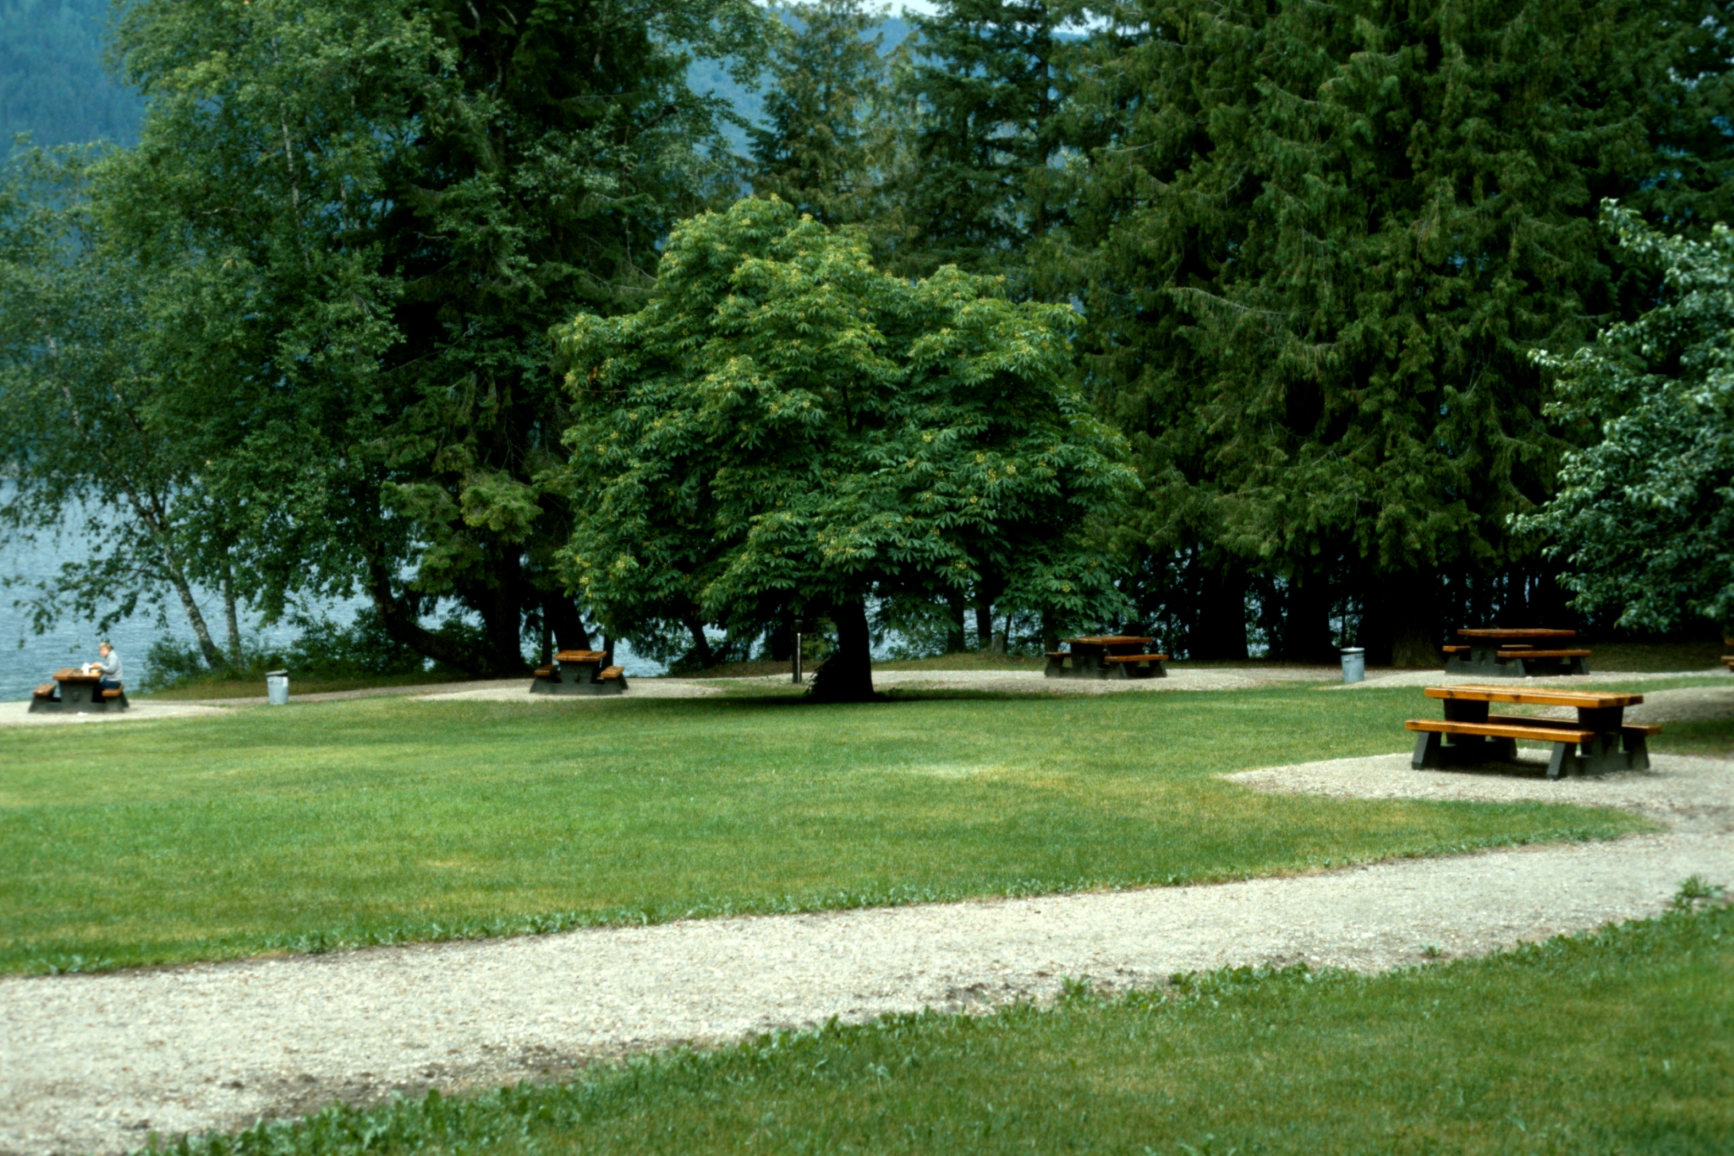 Benches spread-out on a field by the lake, with walking paths in various directions.